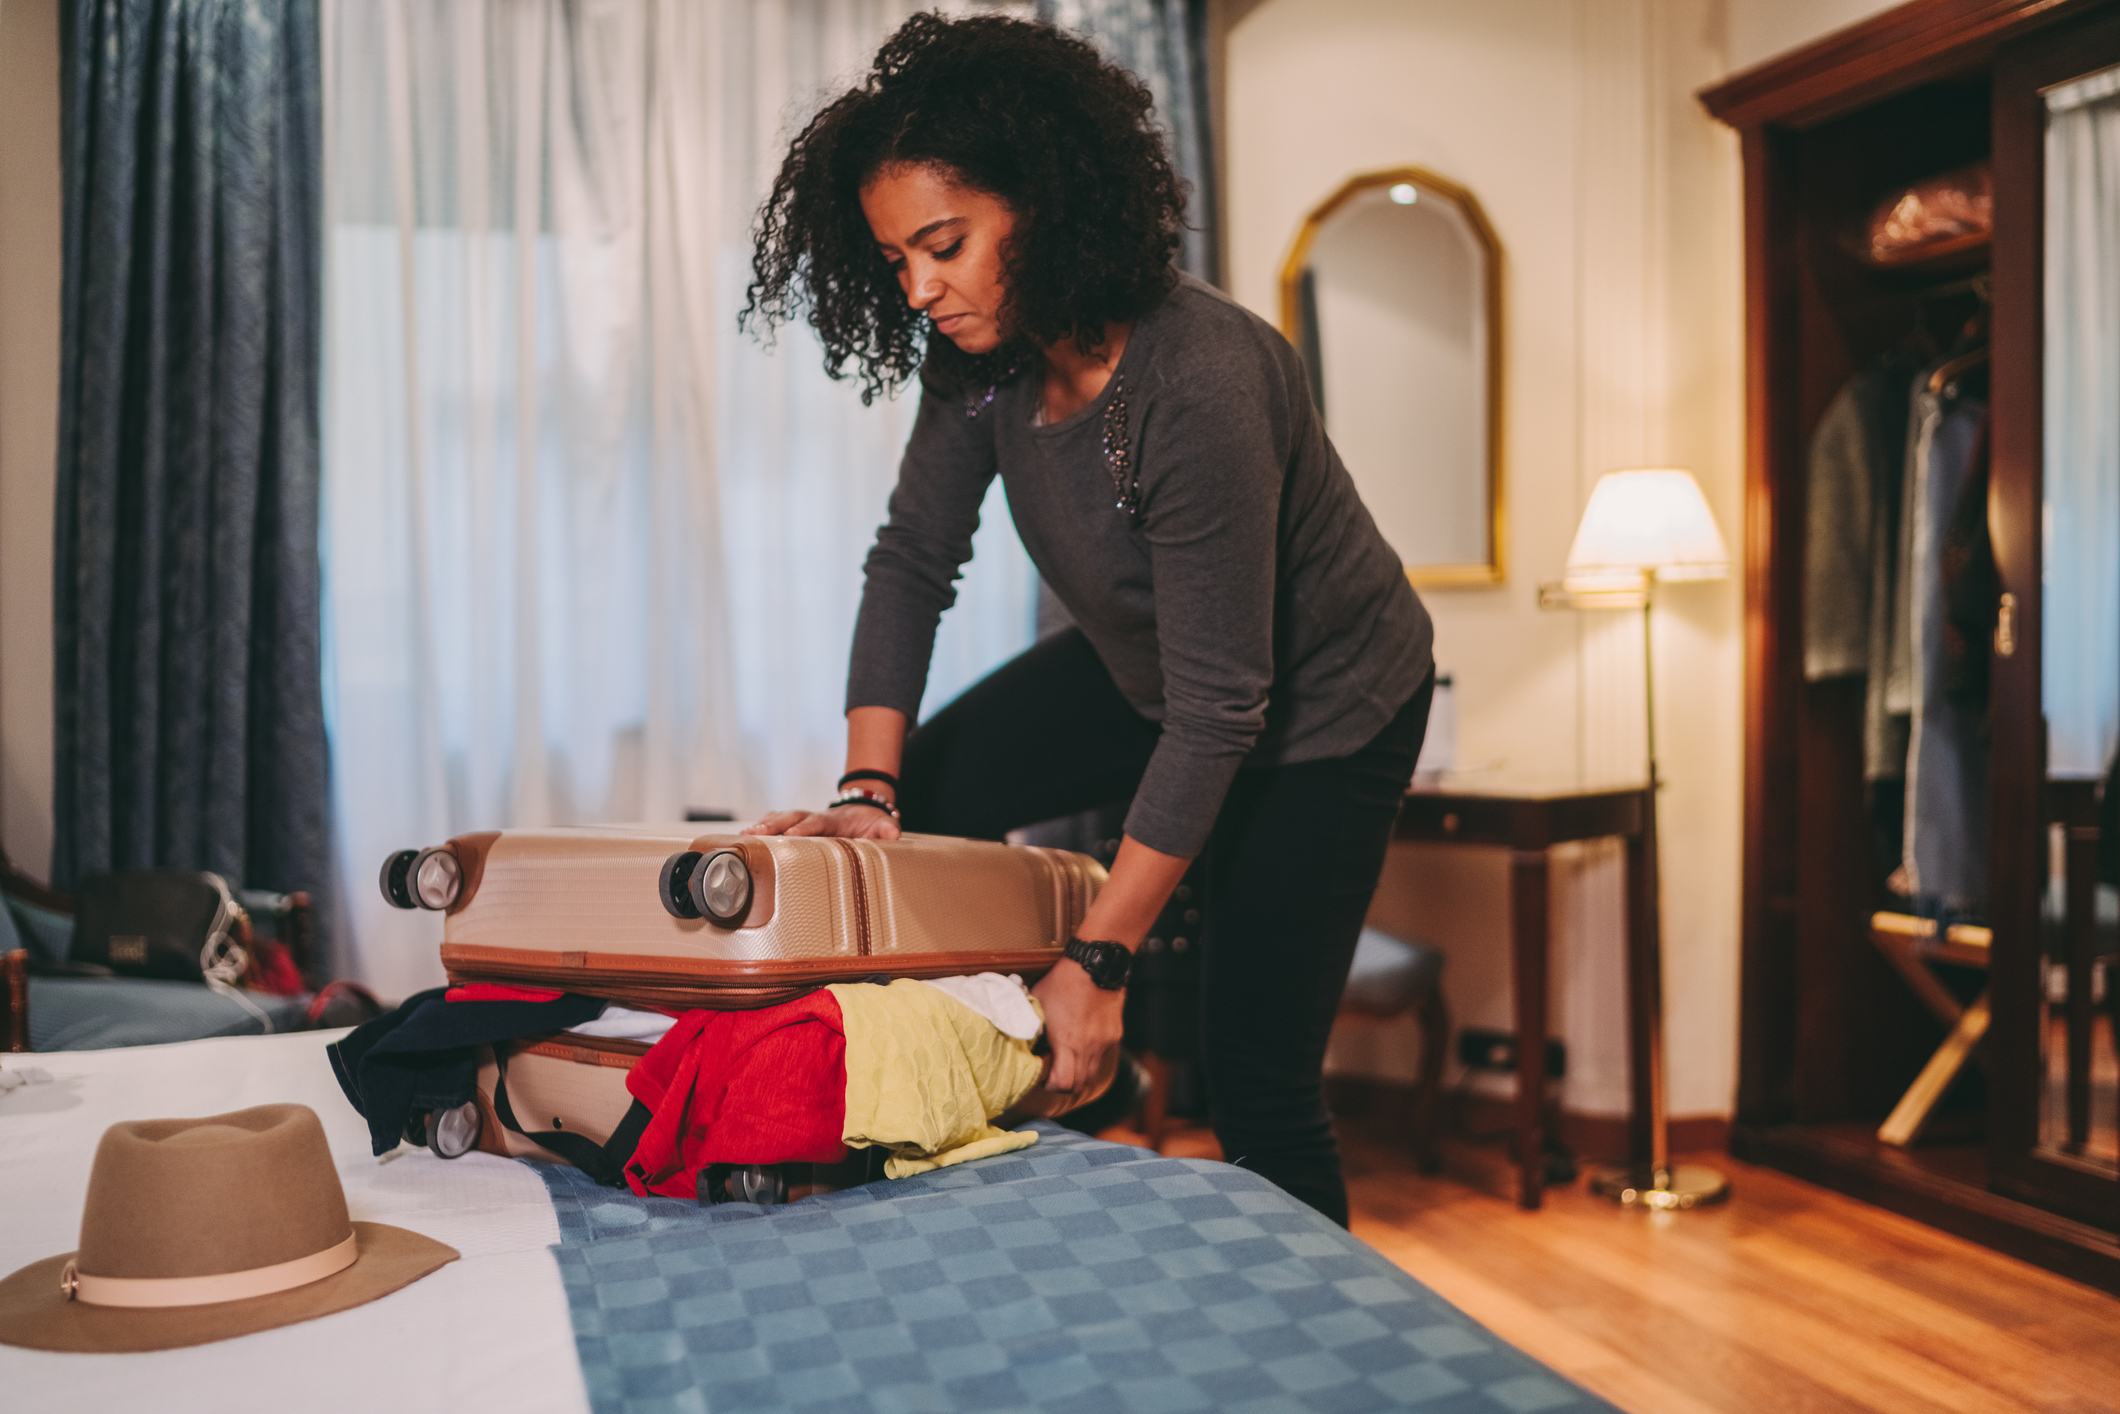 A woman packing up flustered trying to fit things into her suitcase